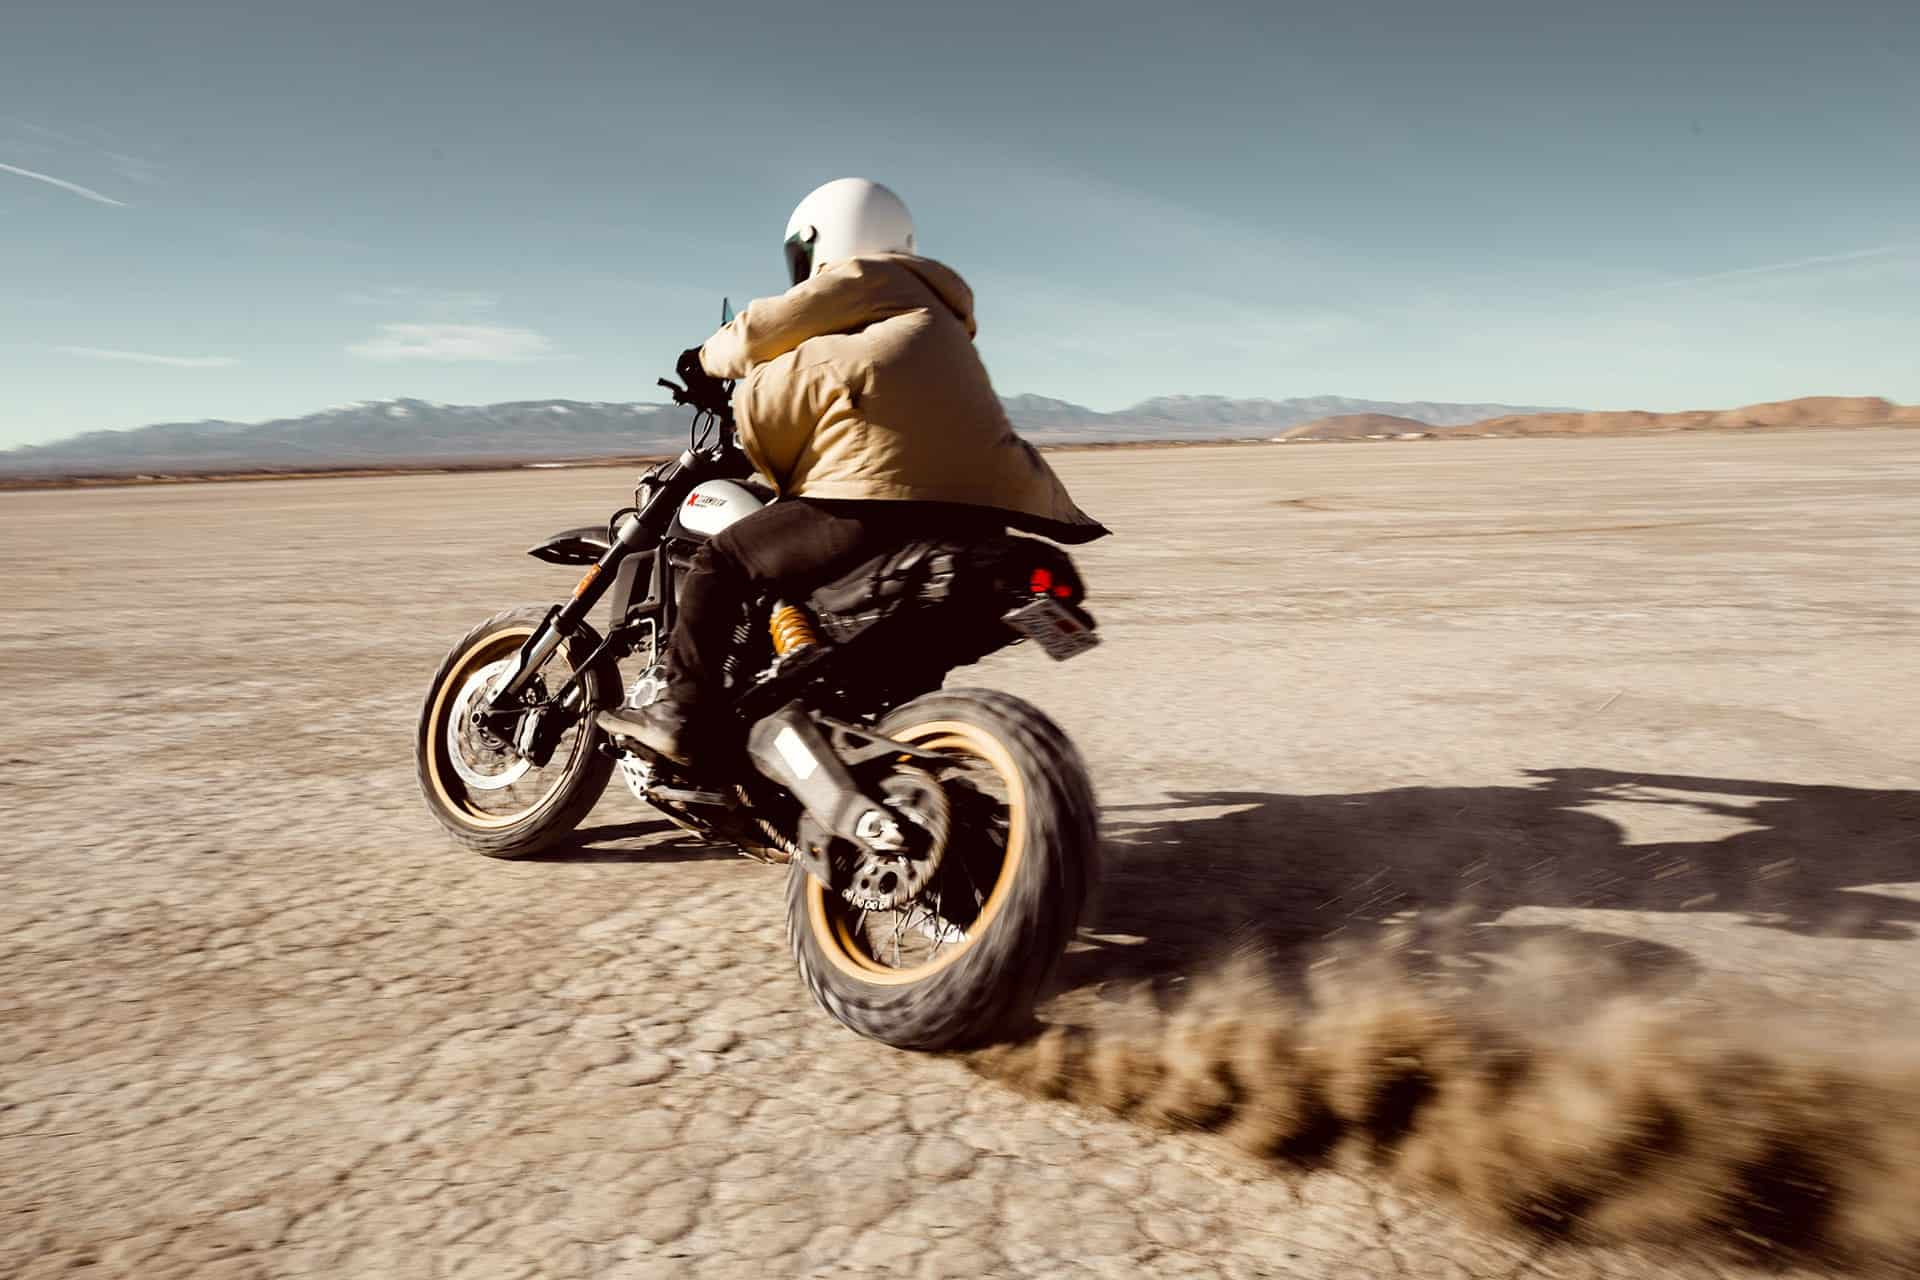 Motorcyclist speeding across a flat, arid landscape, an amazing guide for outdoor enthusiasts.